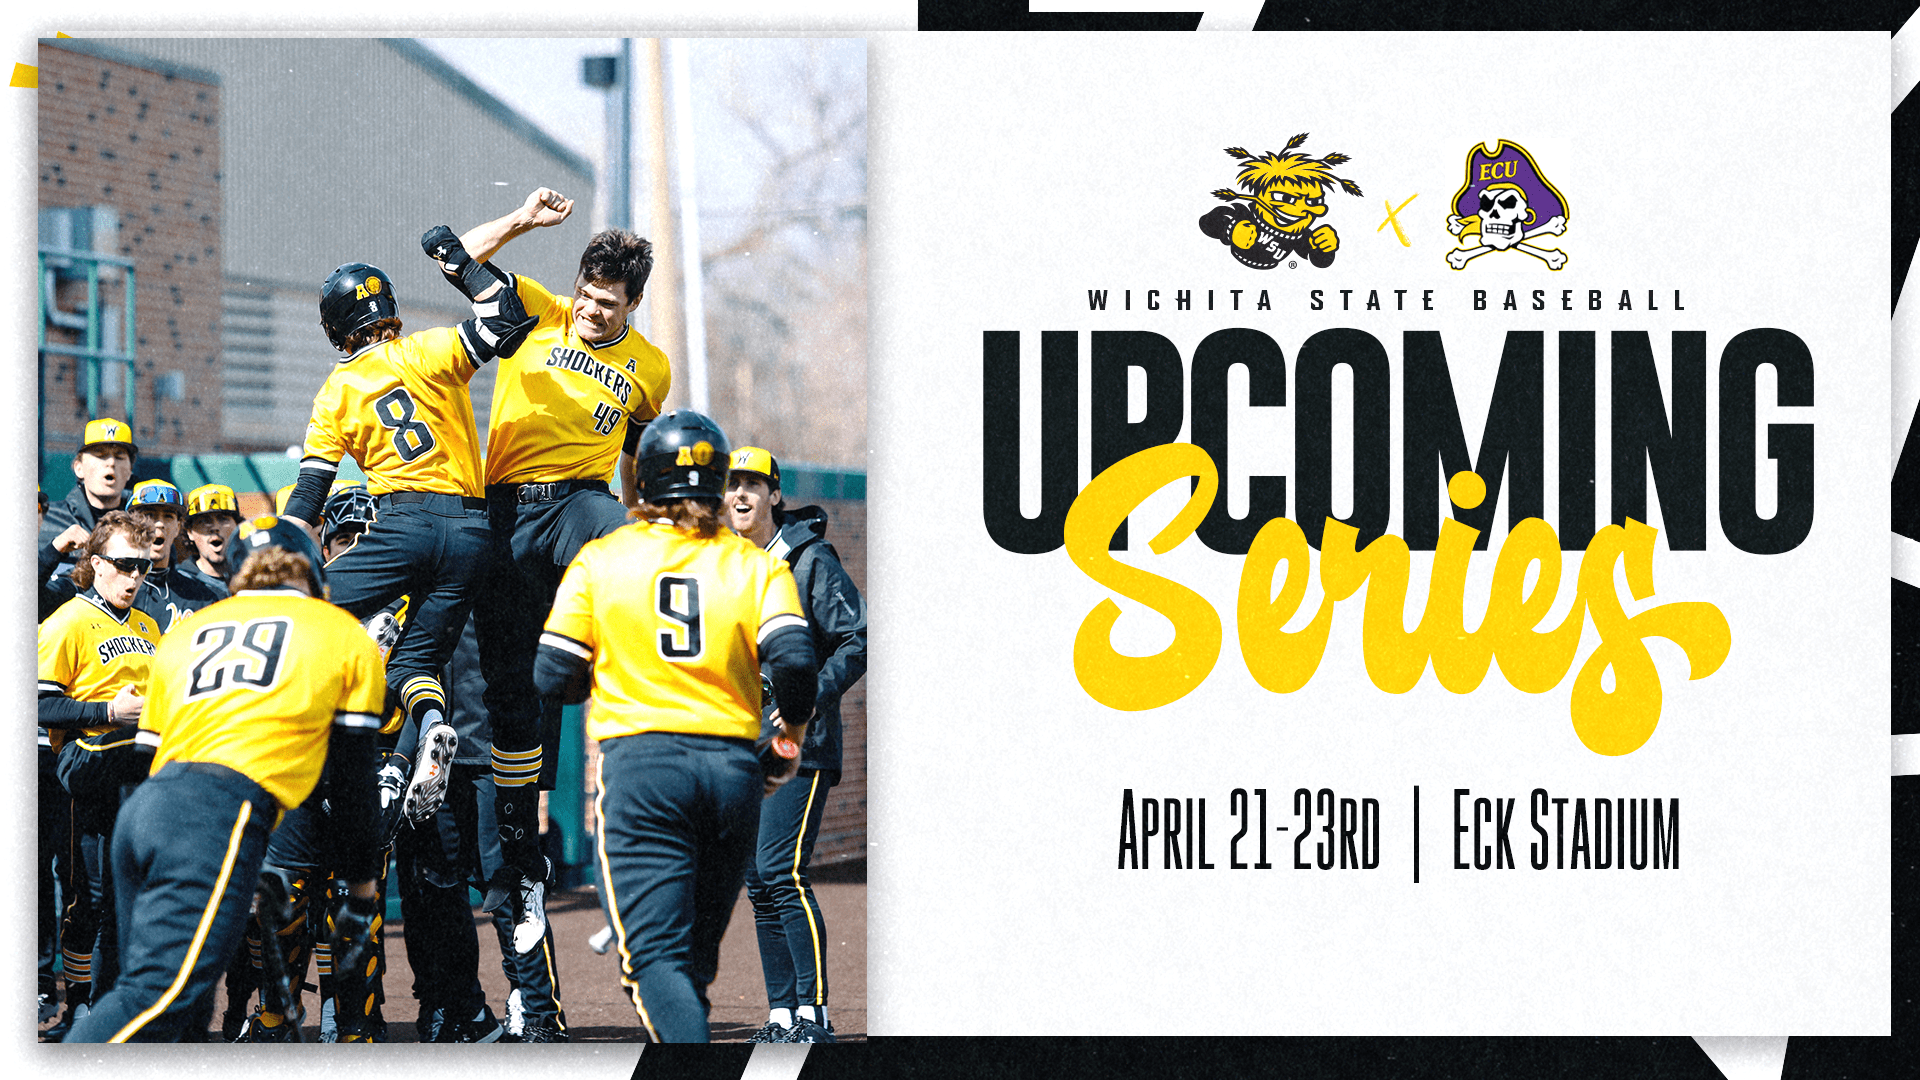 Graphic with a photo of a Shocker baseball players celebrating and the text, "Wichita State Baseball Upcoming Series. April 21-23rd | Eck Stadium" and the WuShock and ECU logos.